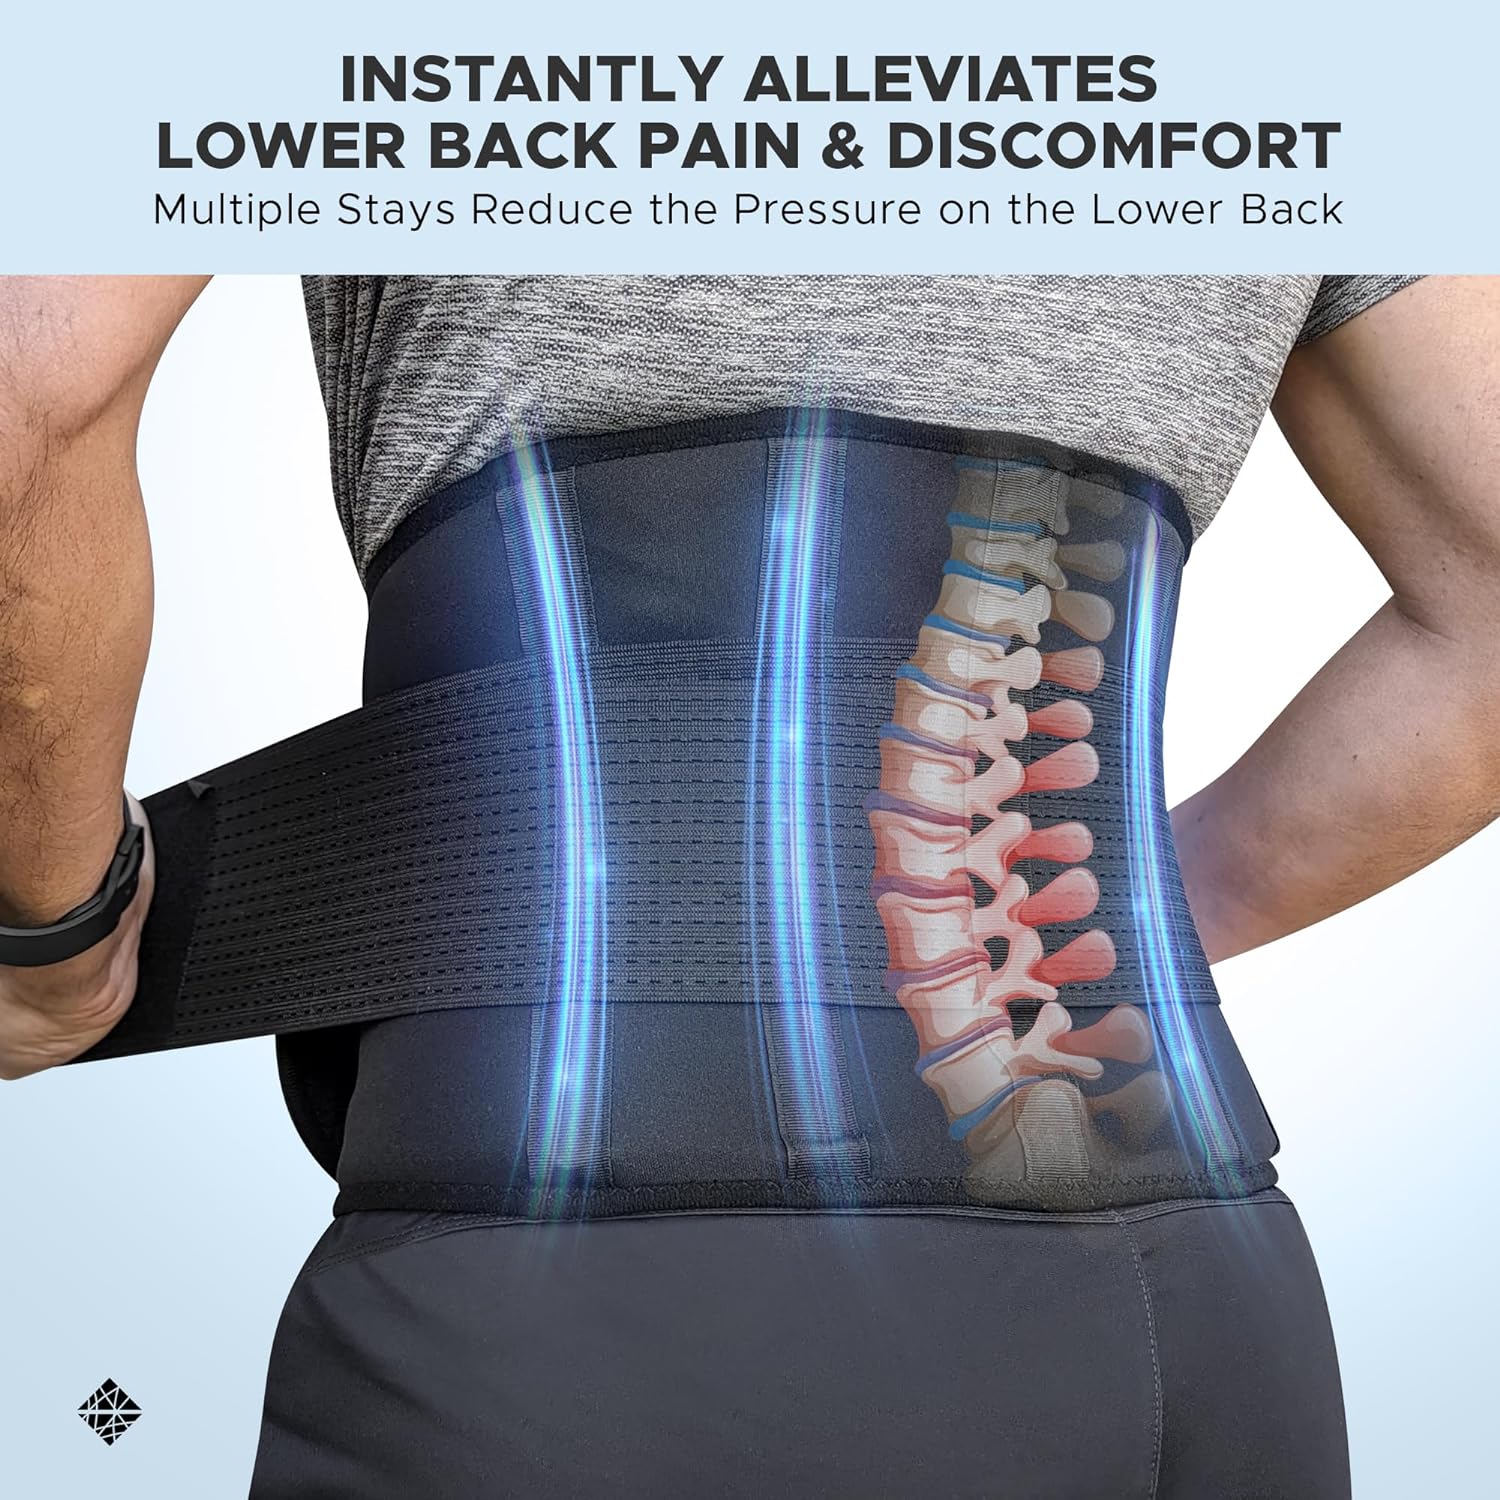 Lower Back Brace for Lumbar Support in PLUS SIZE - NeoHealth